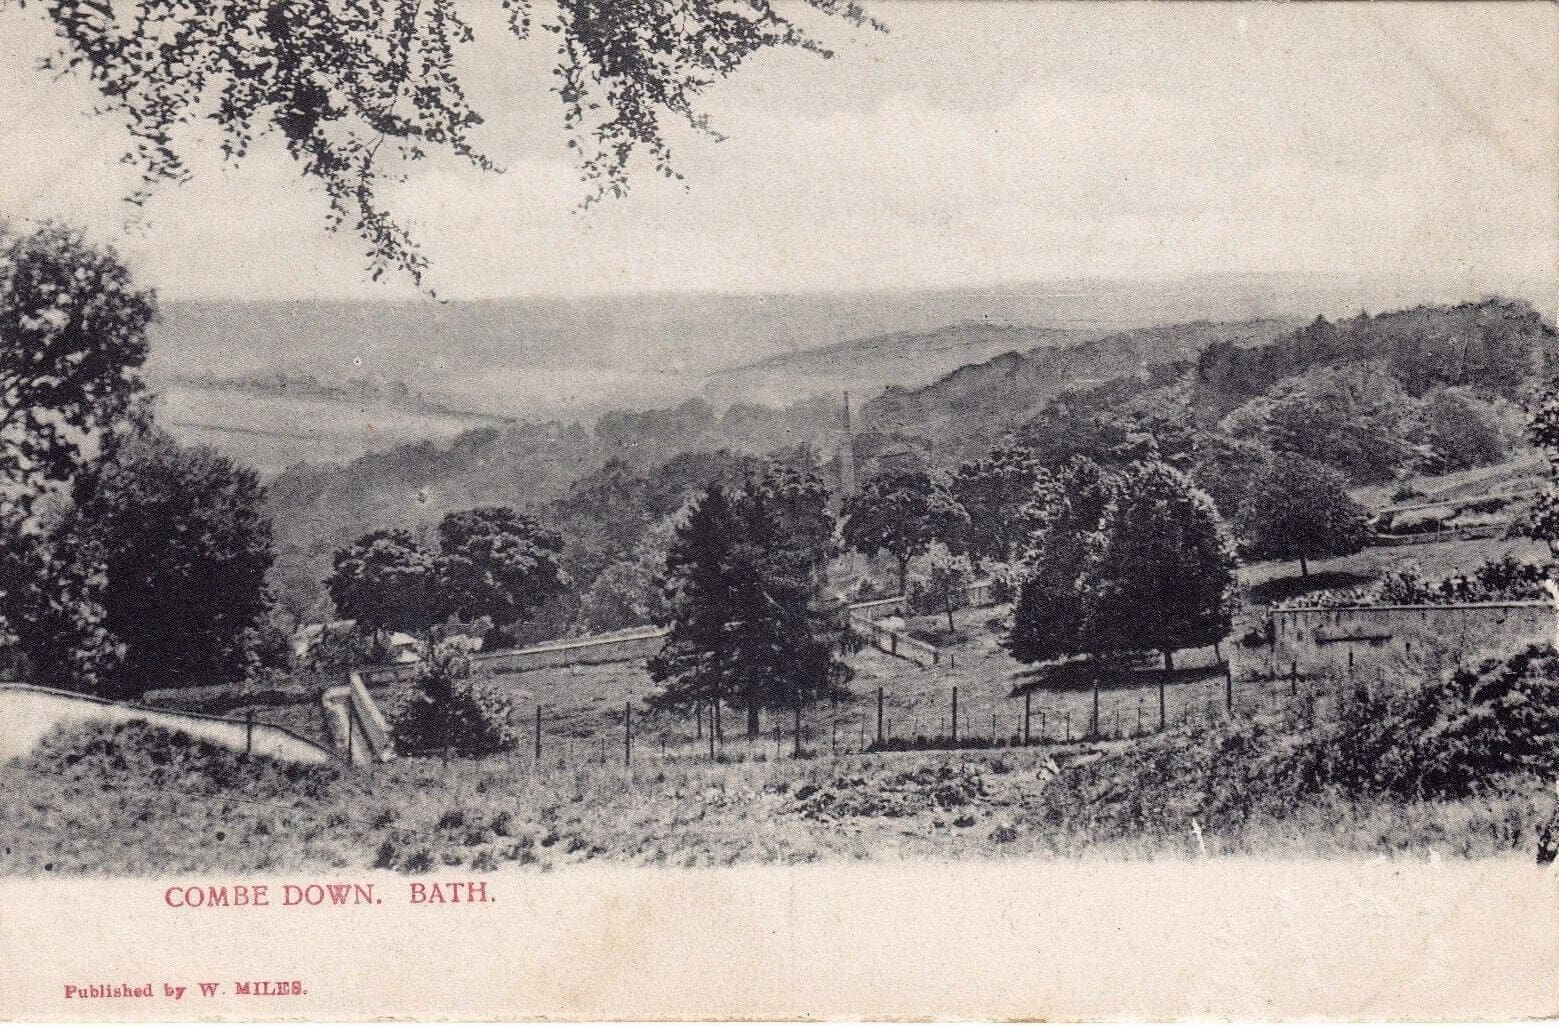 Looking South from Combe Down, early 1900s